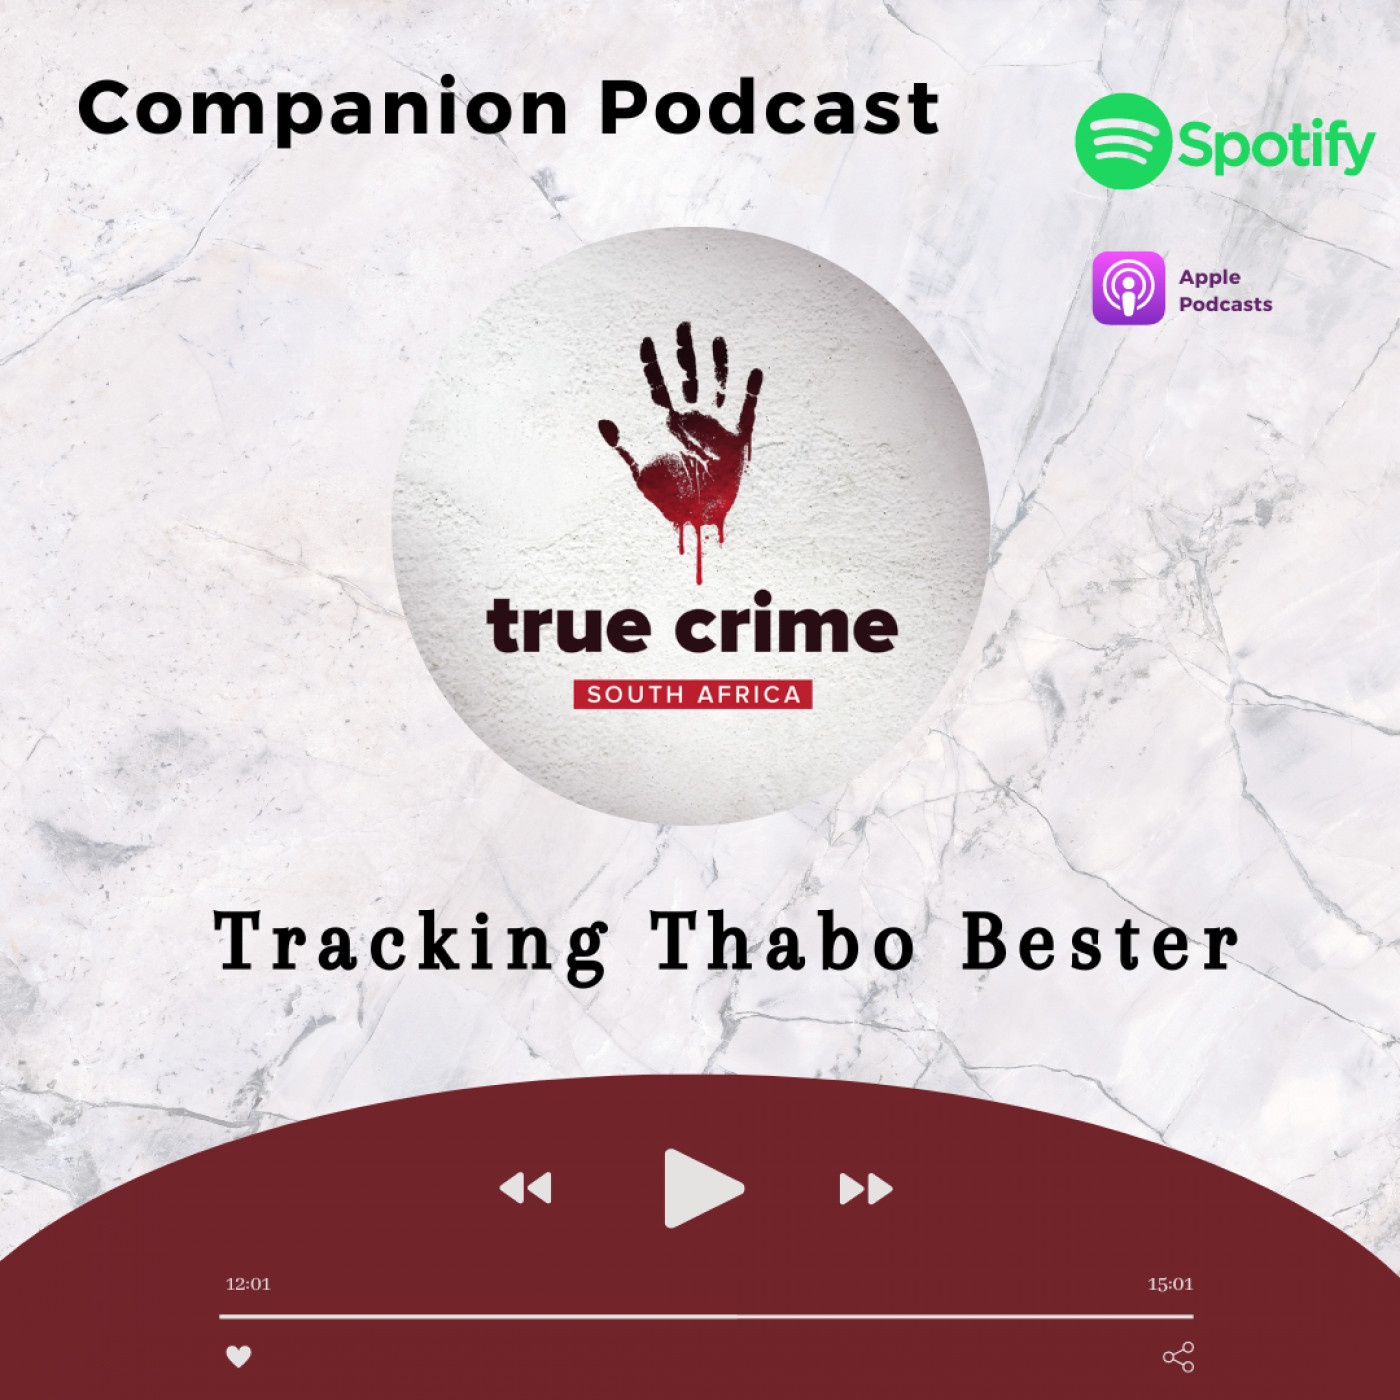 Companion Episode: Tracking Thabo Bester (Brought to you by Showmax)